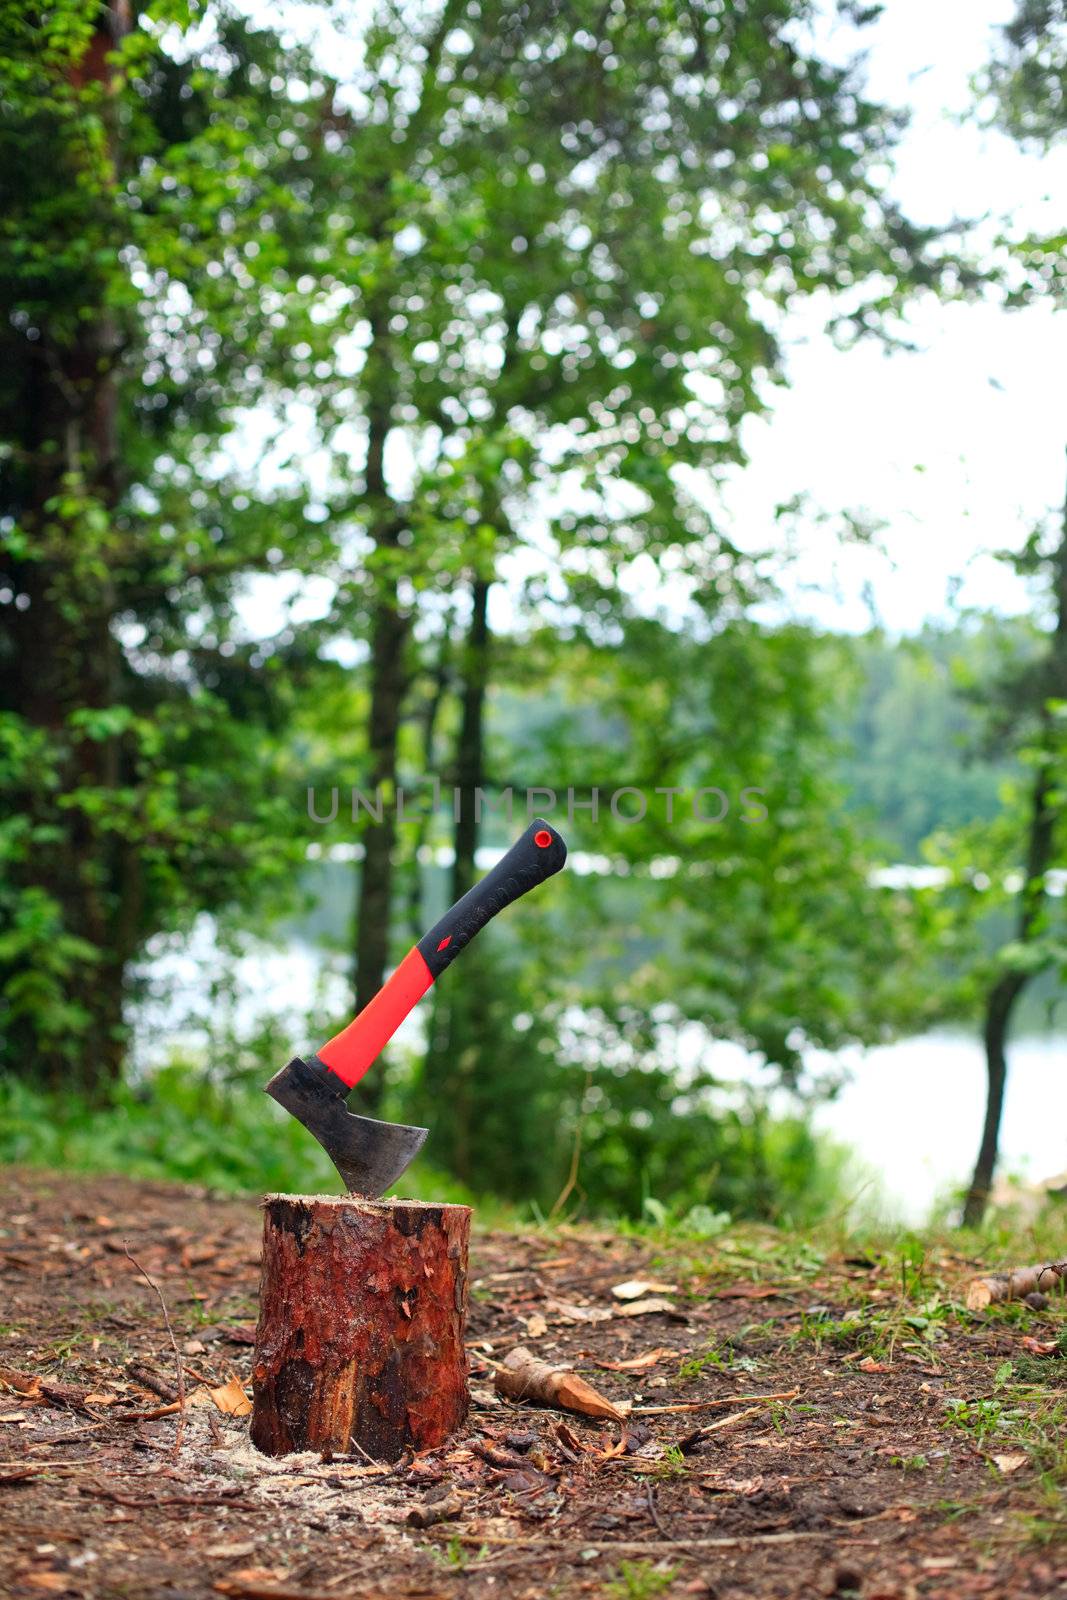 Camping hatchet by naumoid